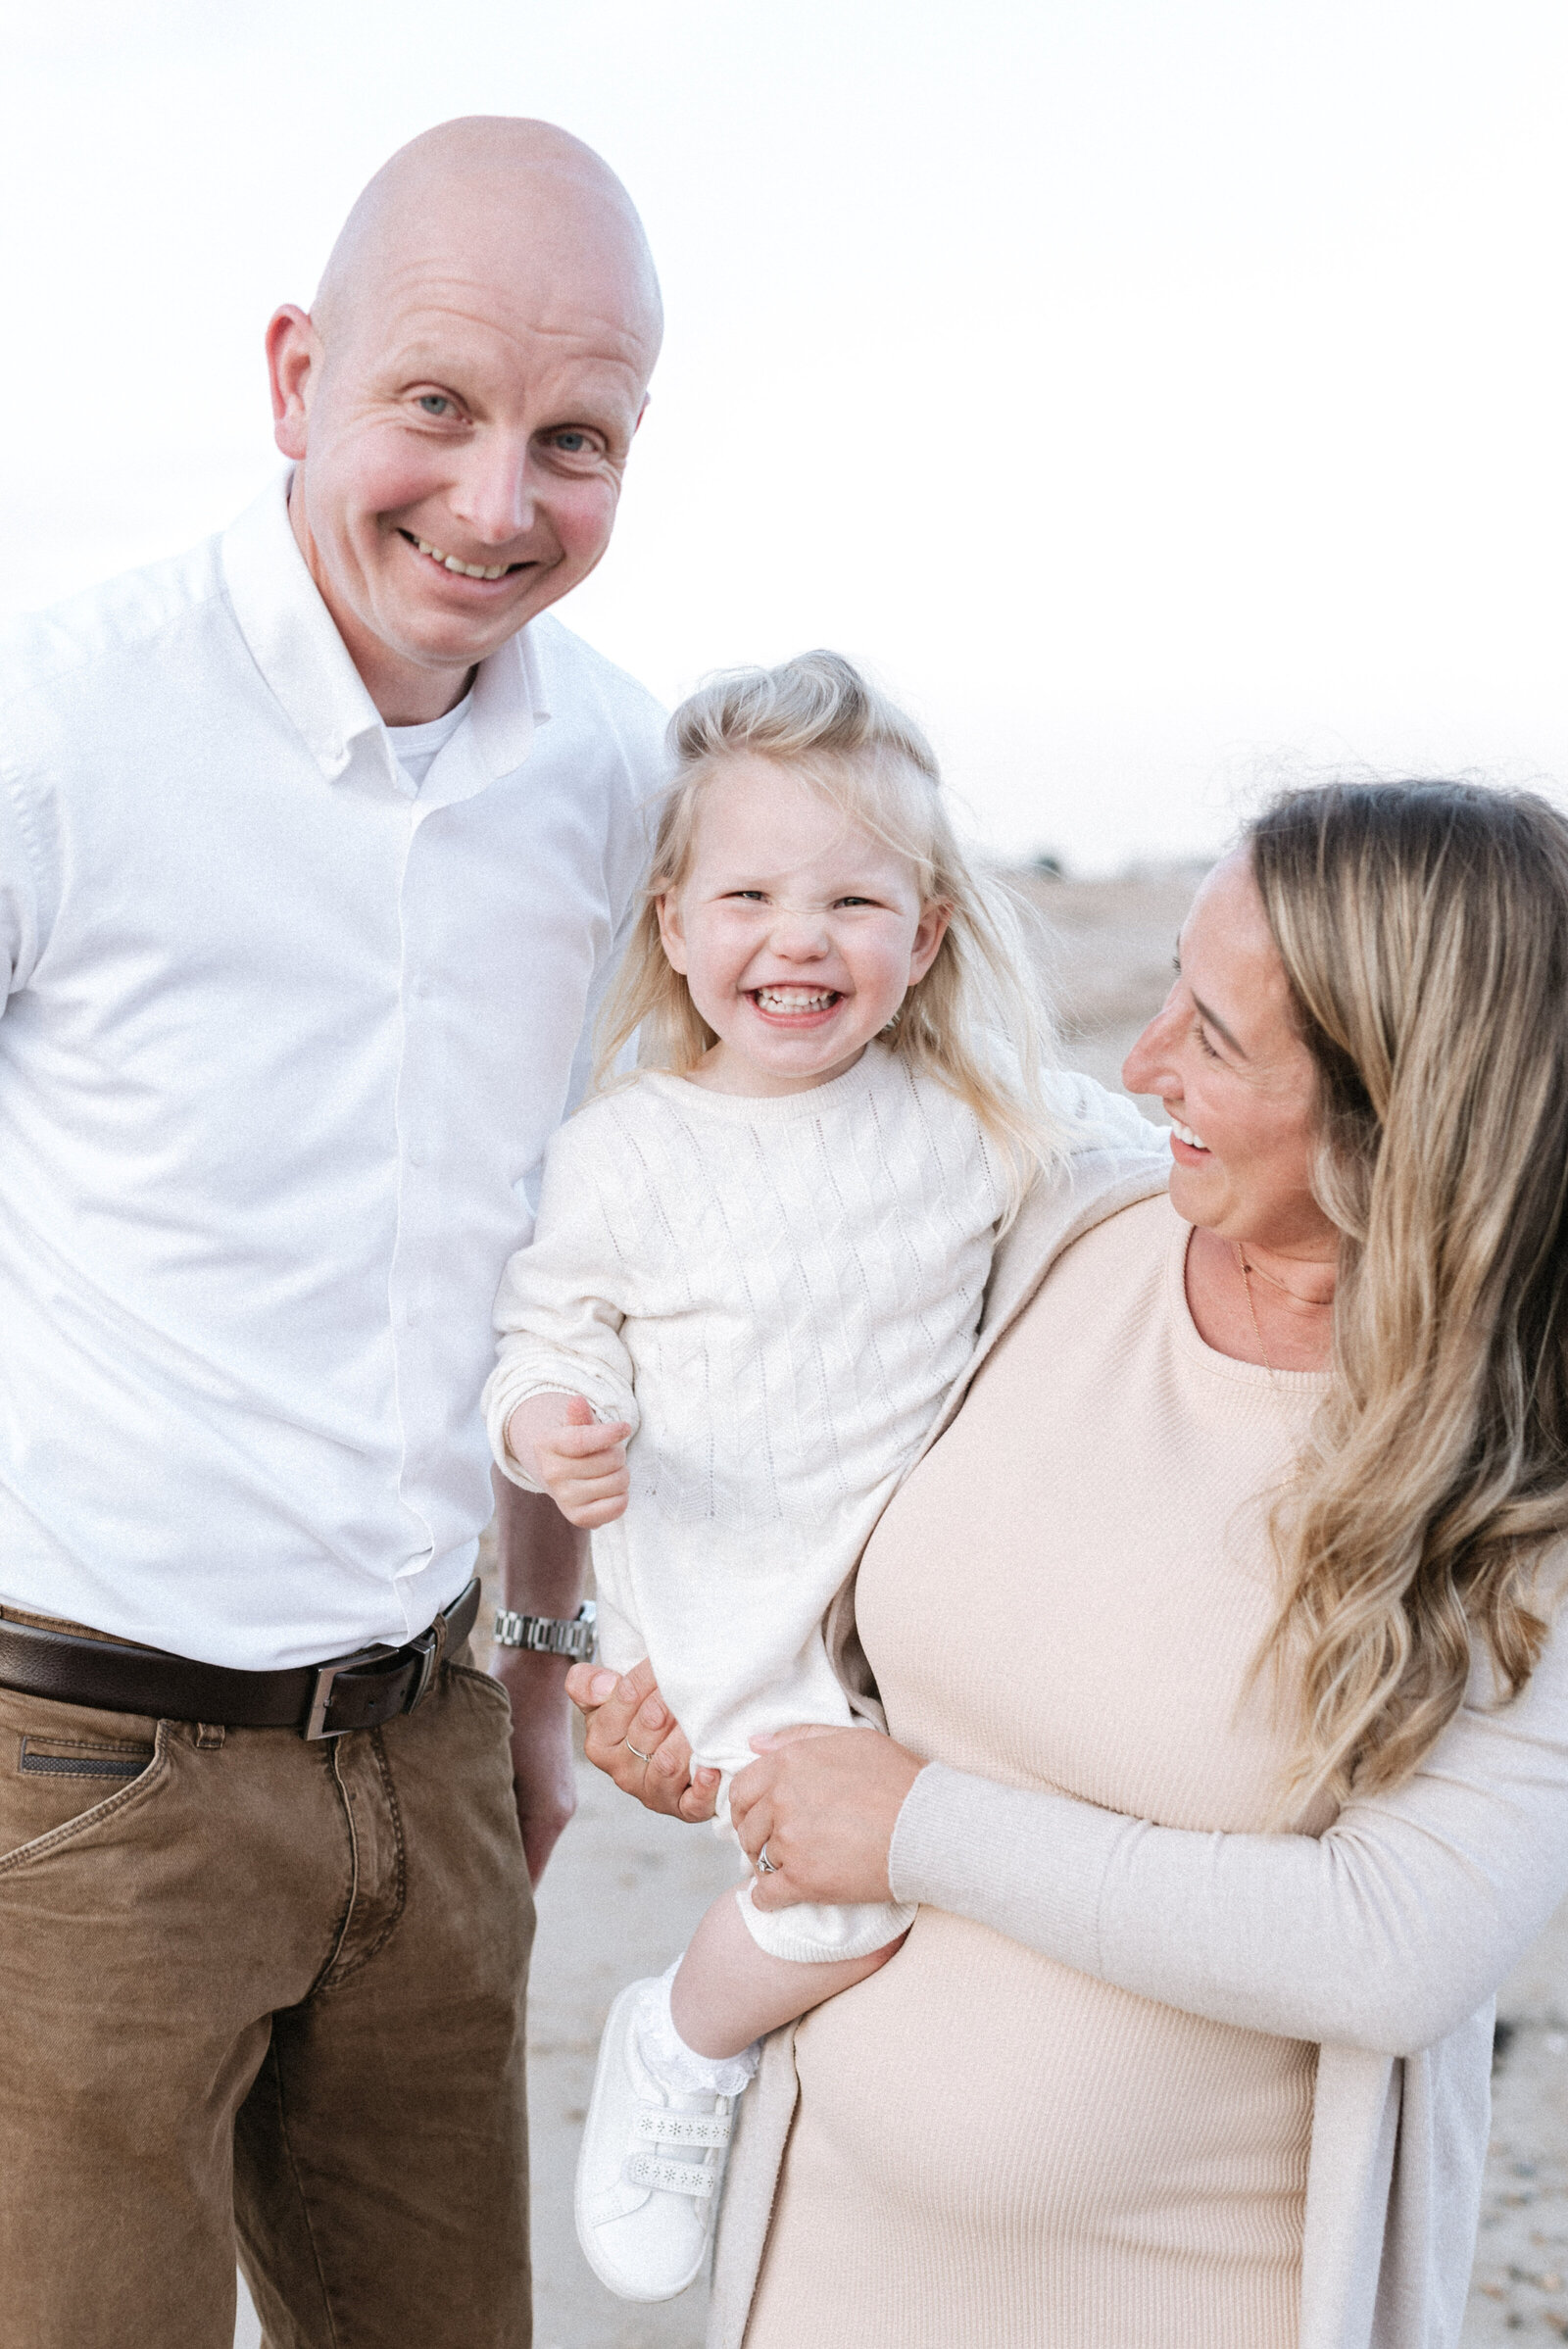 Goring west sussex family photoshoot with a family of 3 smiling